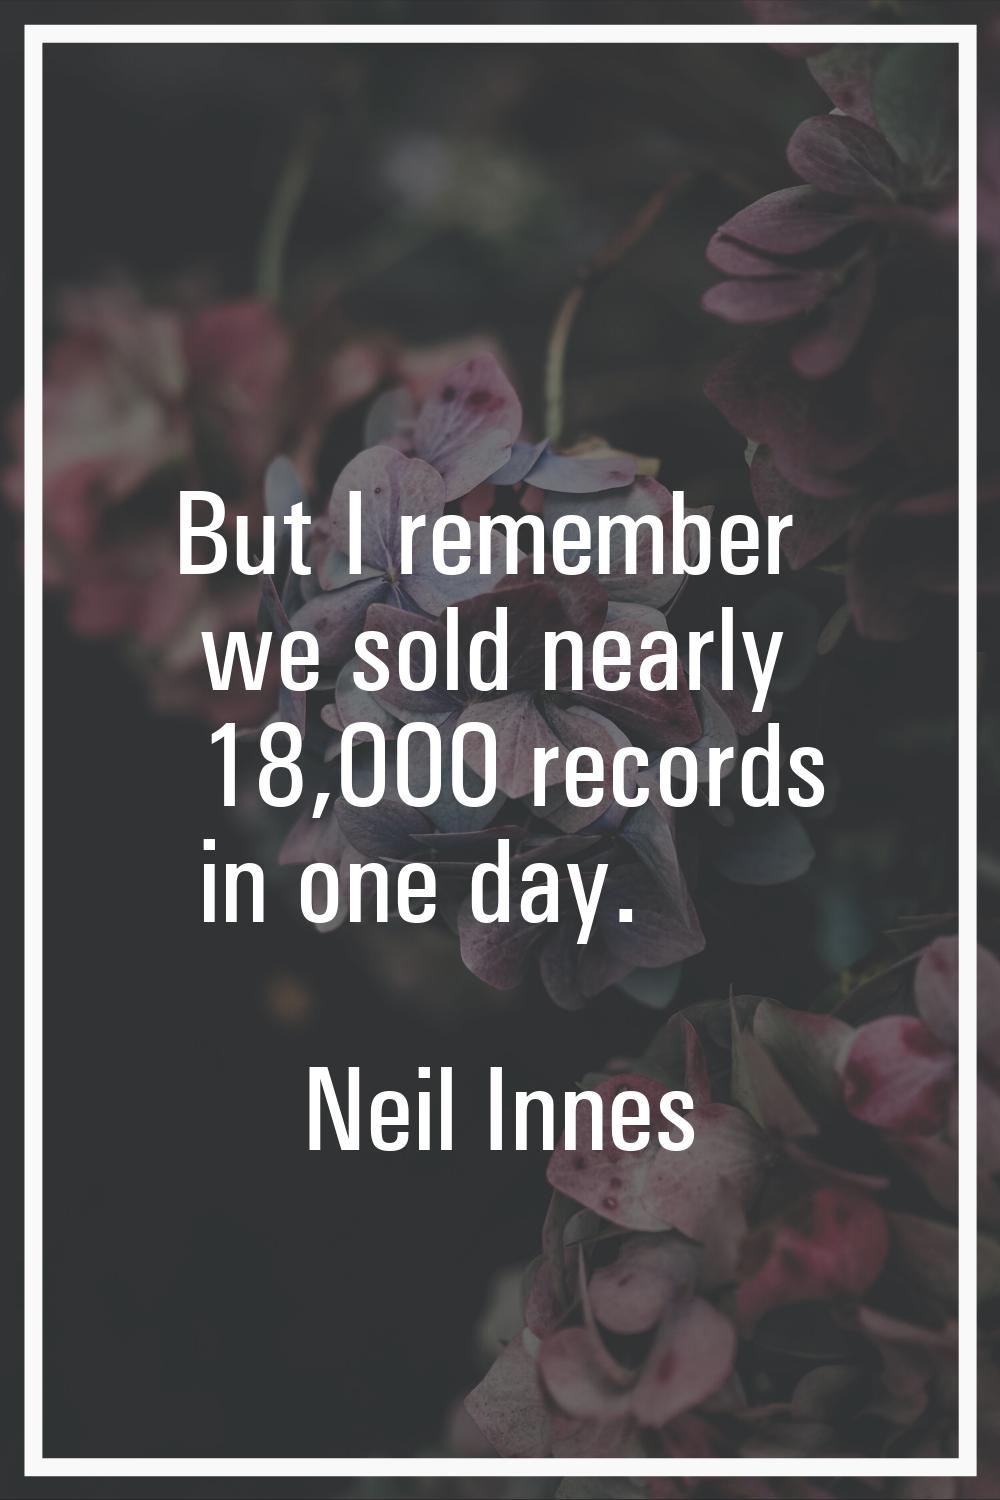 But I remember we sold nearly 18,000 records in one day.